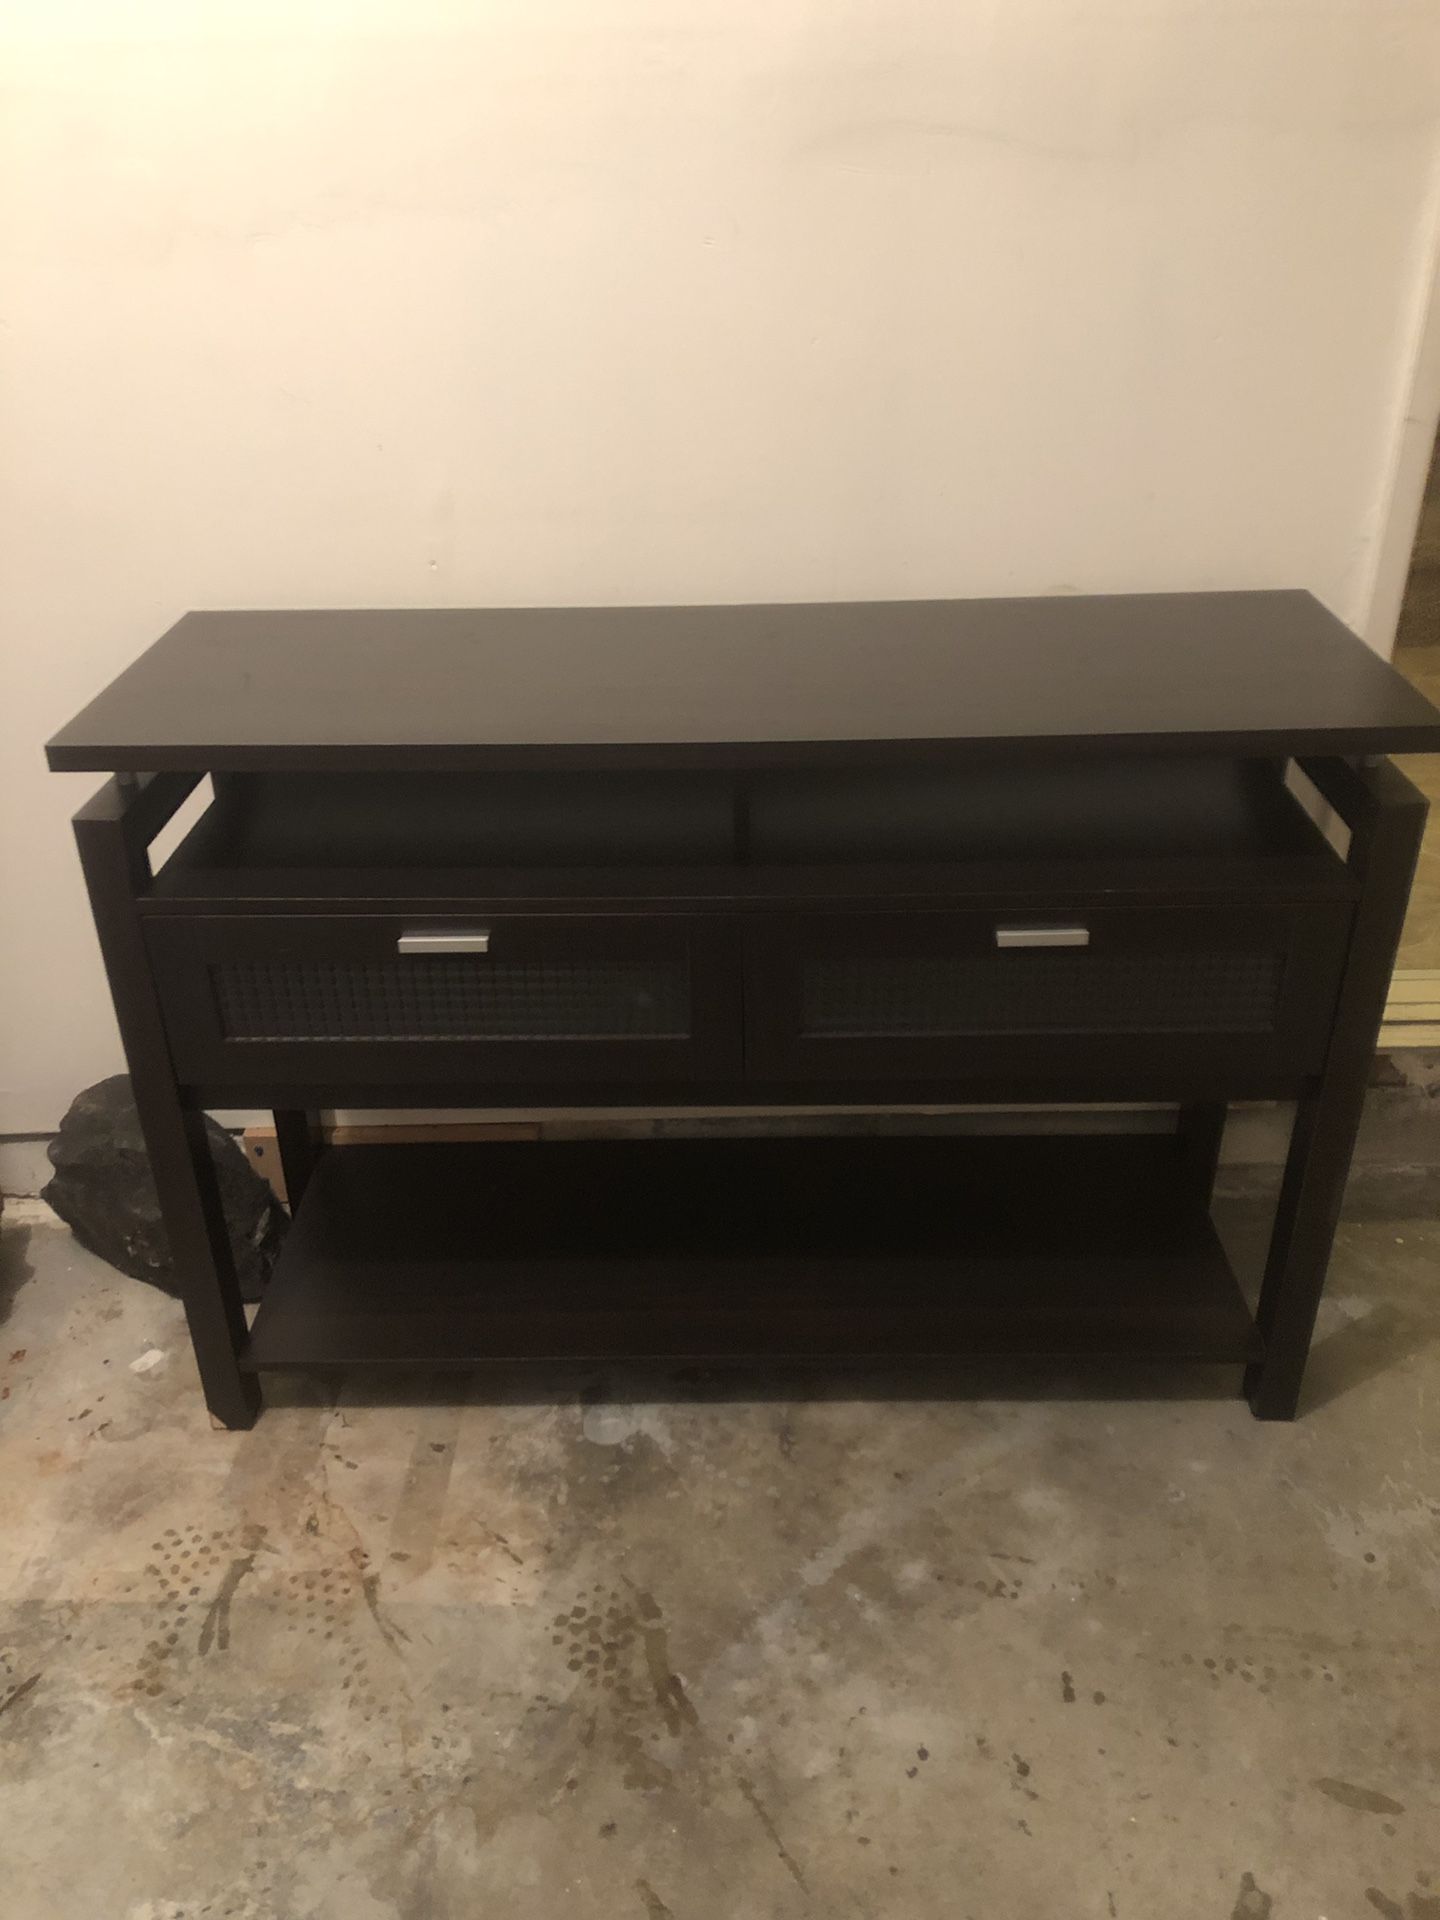 Tv stand or entry table nice multi use table solid good condition